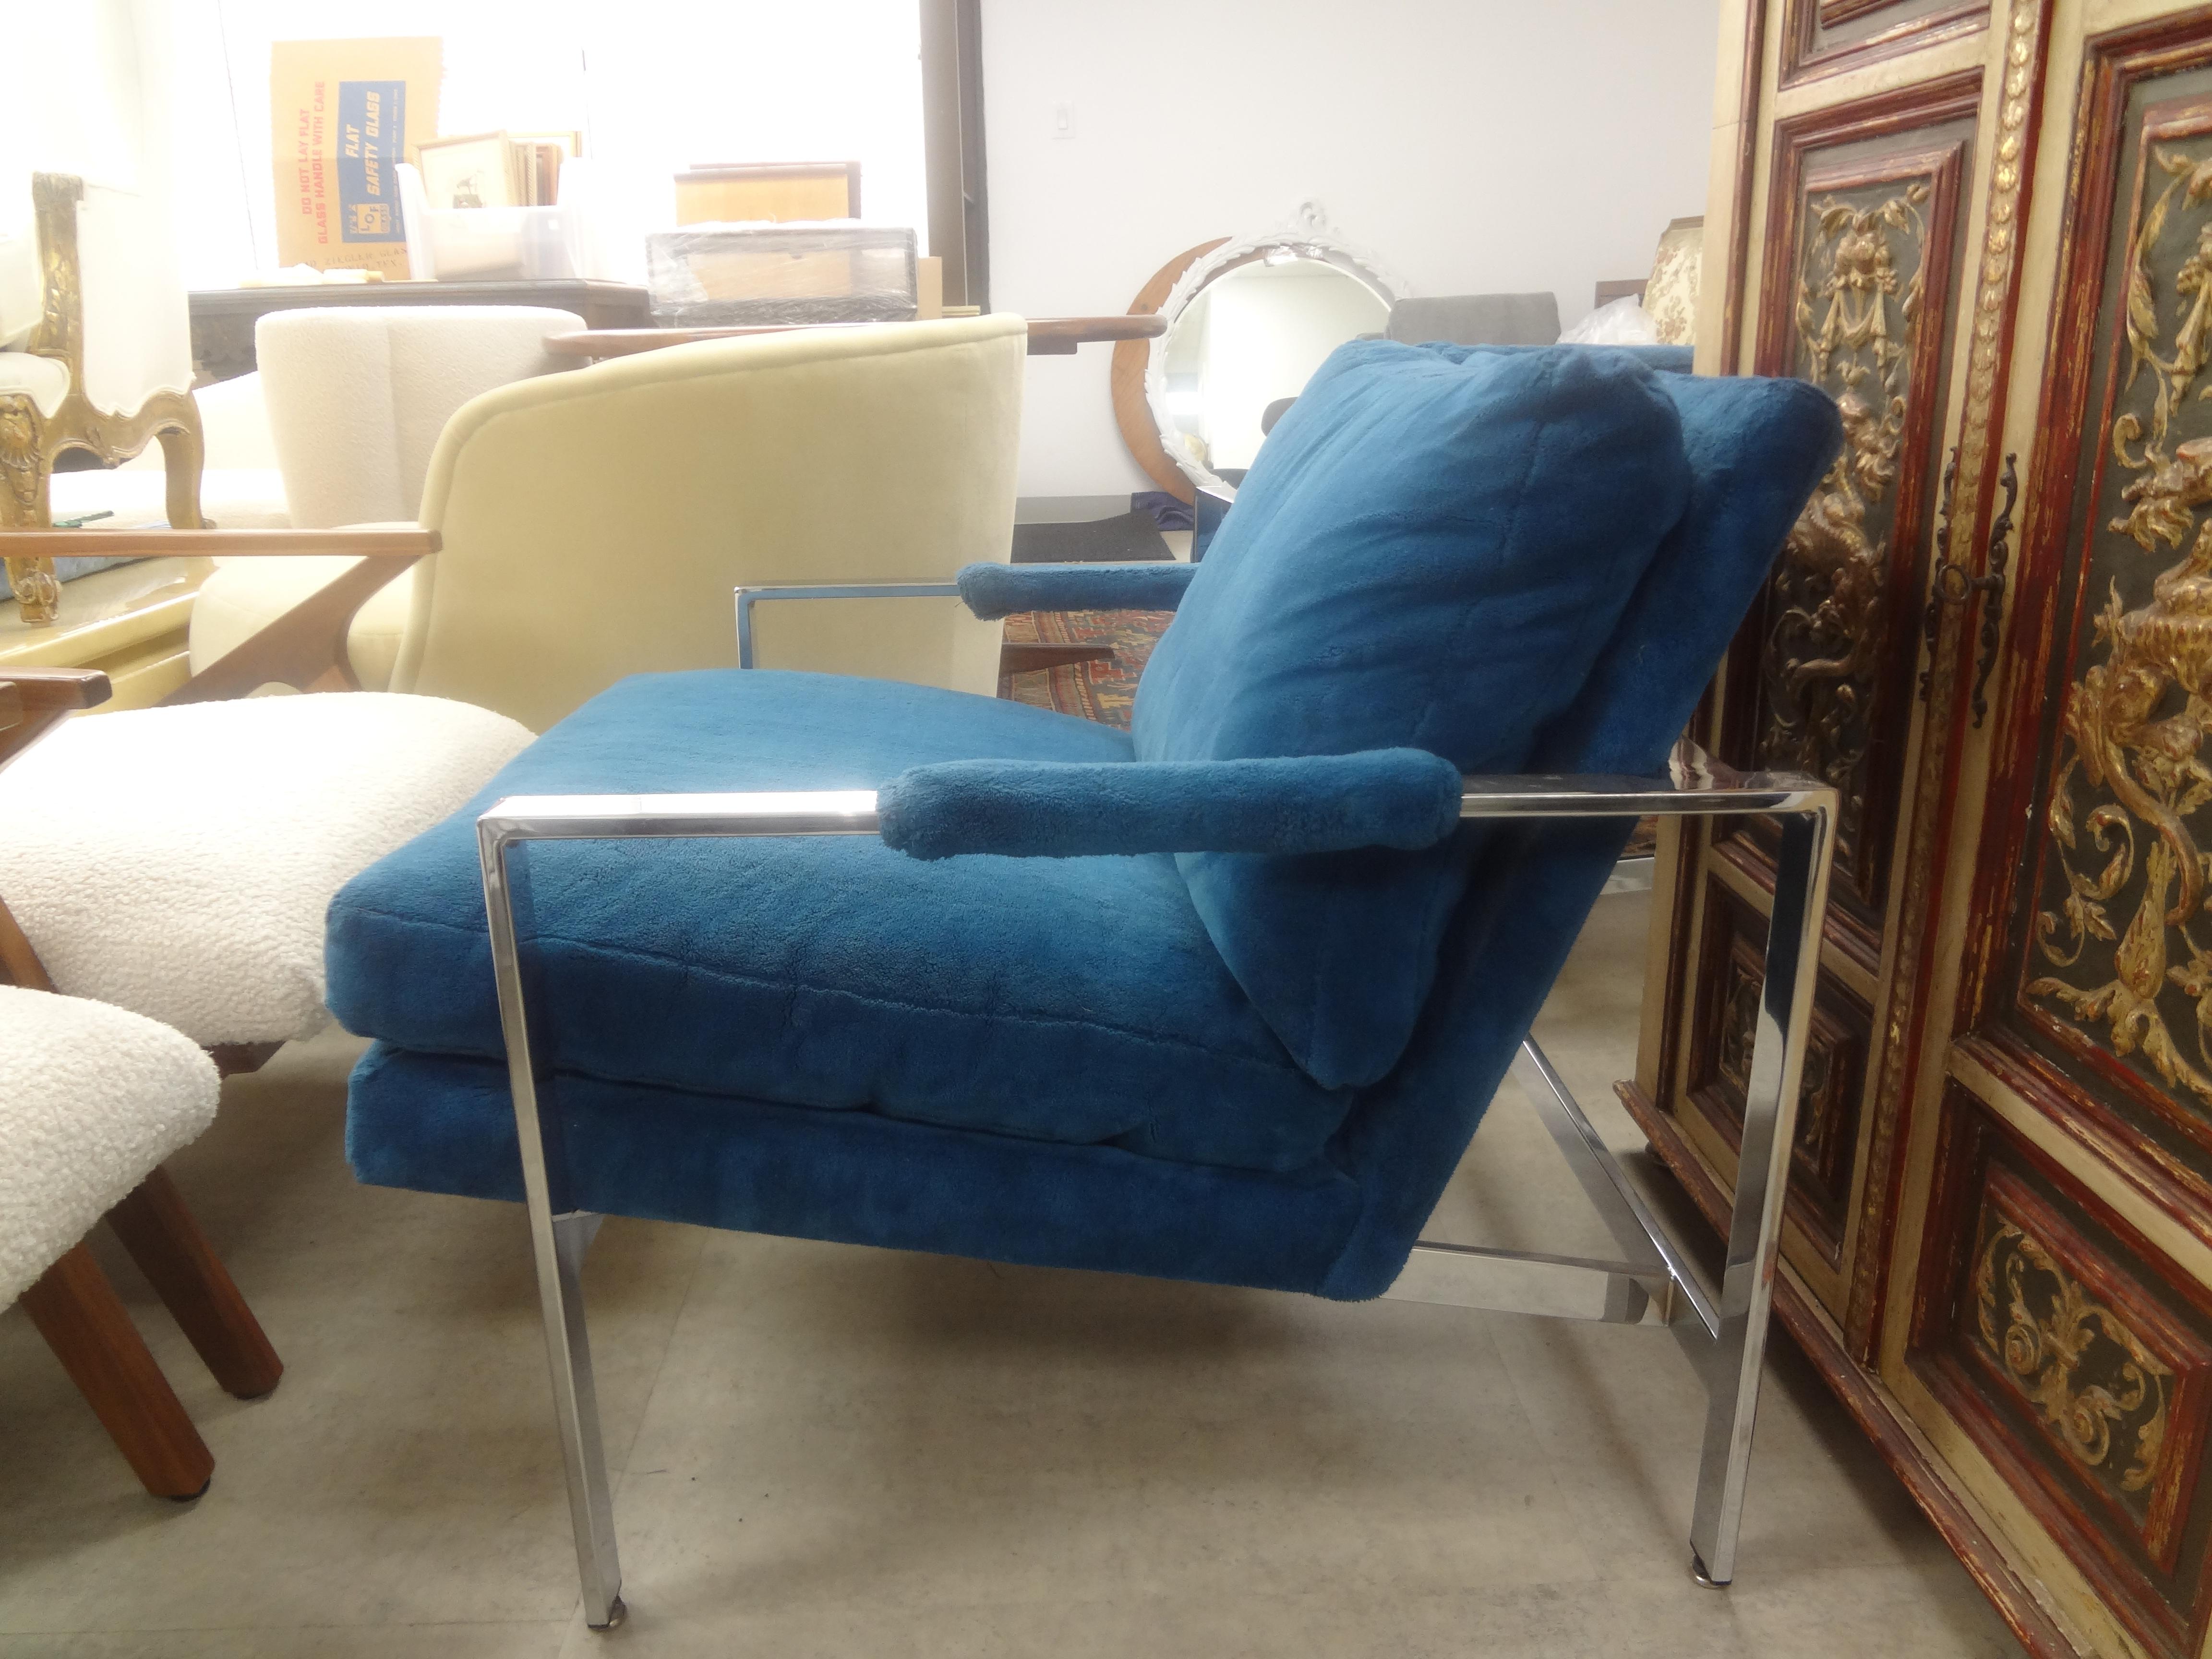 American Pair Of Milo Baughman For Thayer Coggin Chrome Lounge Chairs For Sale